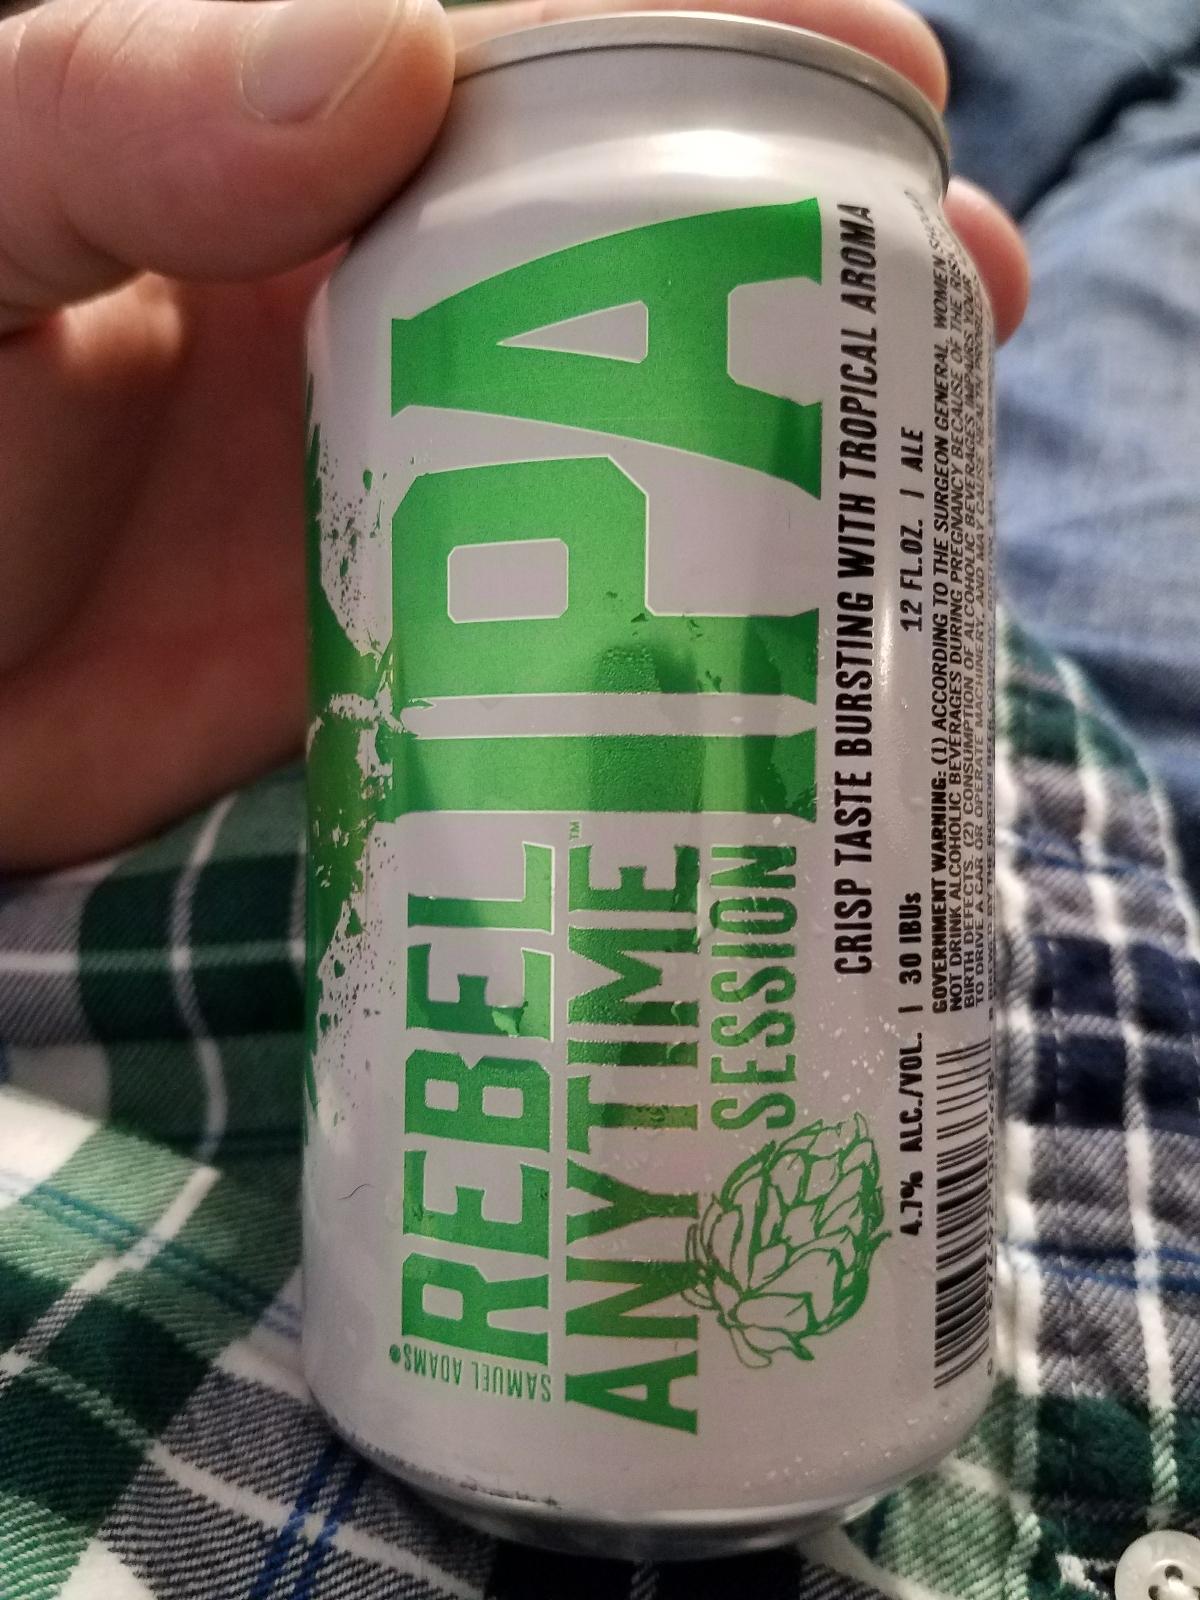 Rebel Anytime Session IPA